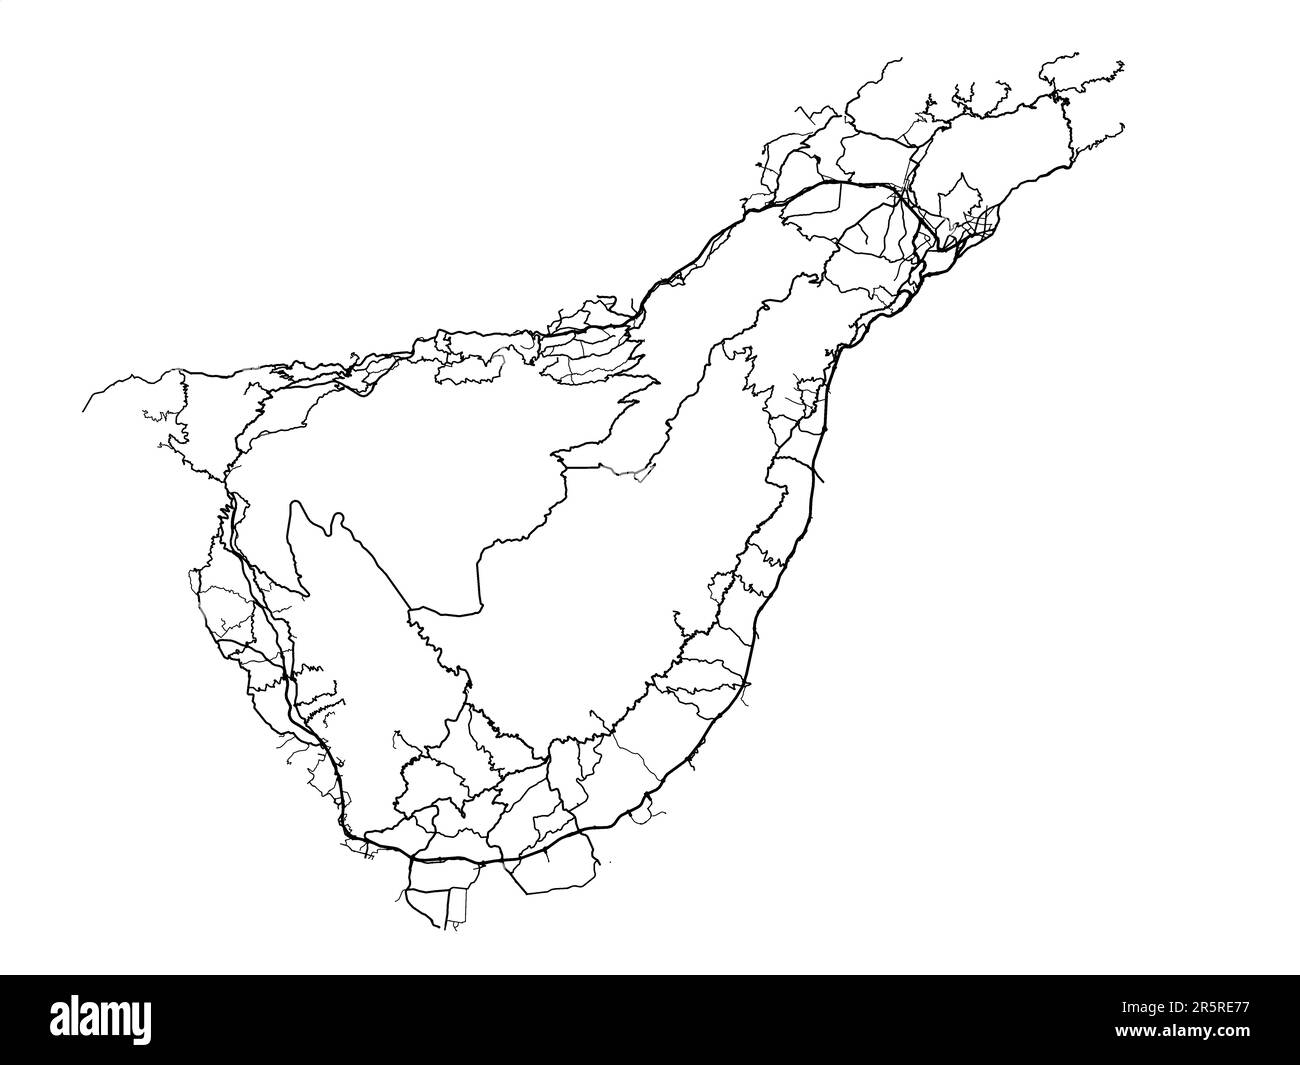 Vector road map of the city of  Tenerife in Spain on a white background. Stock Photo